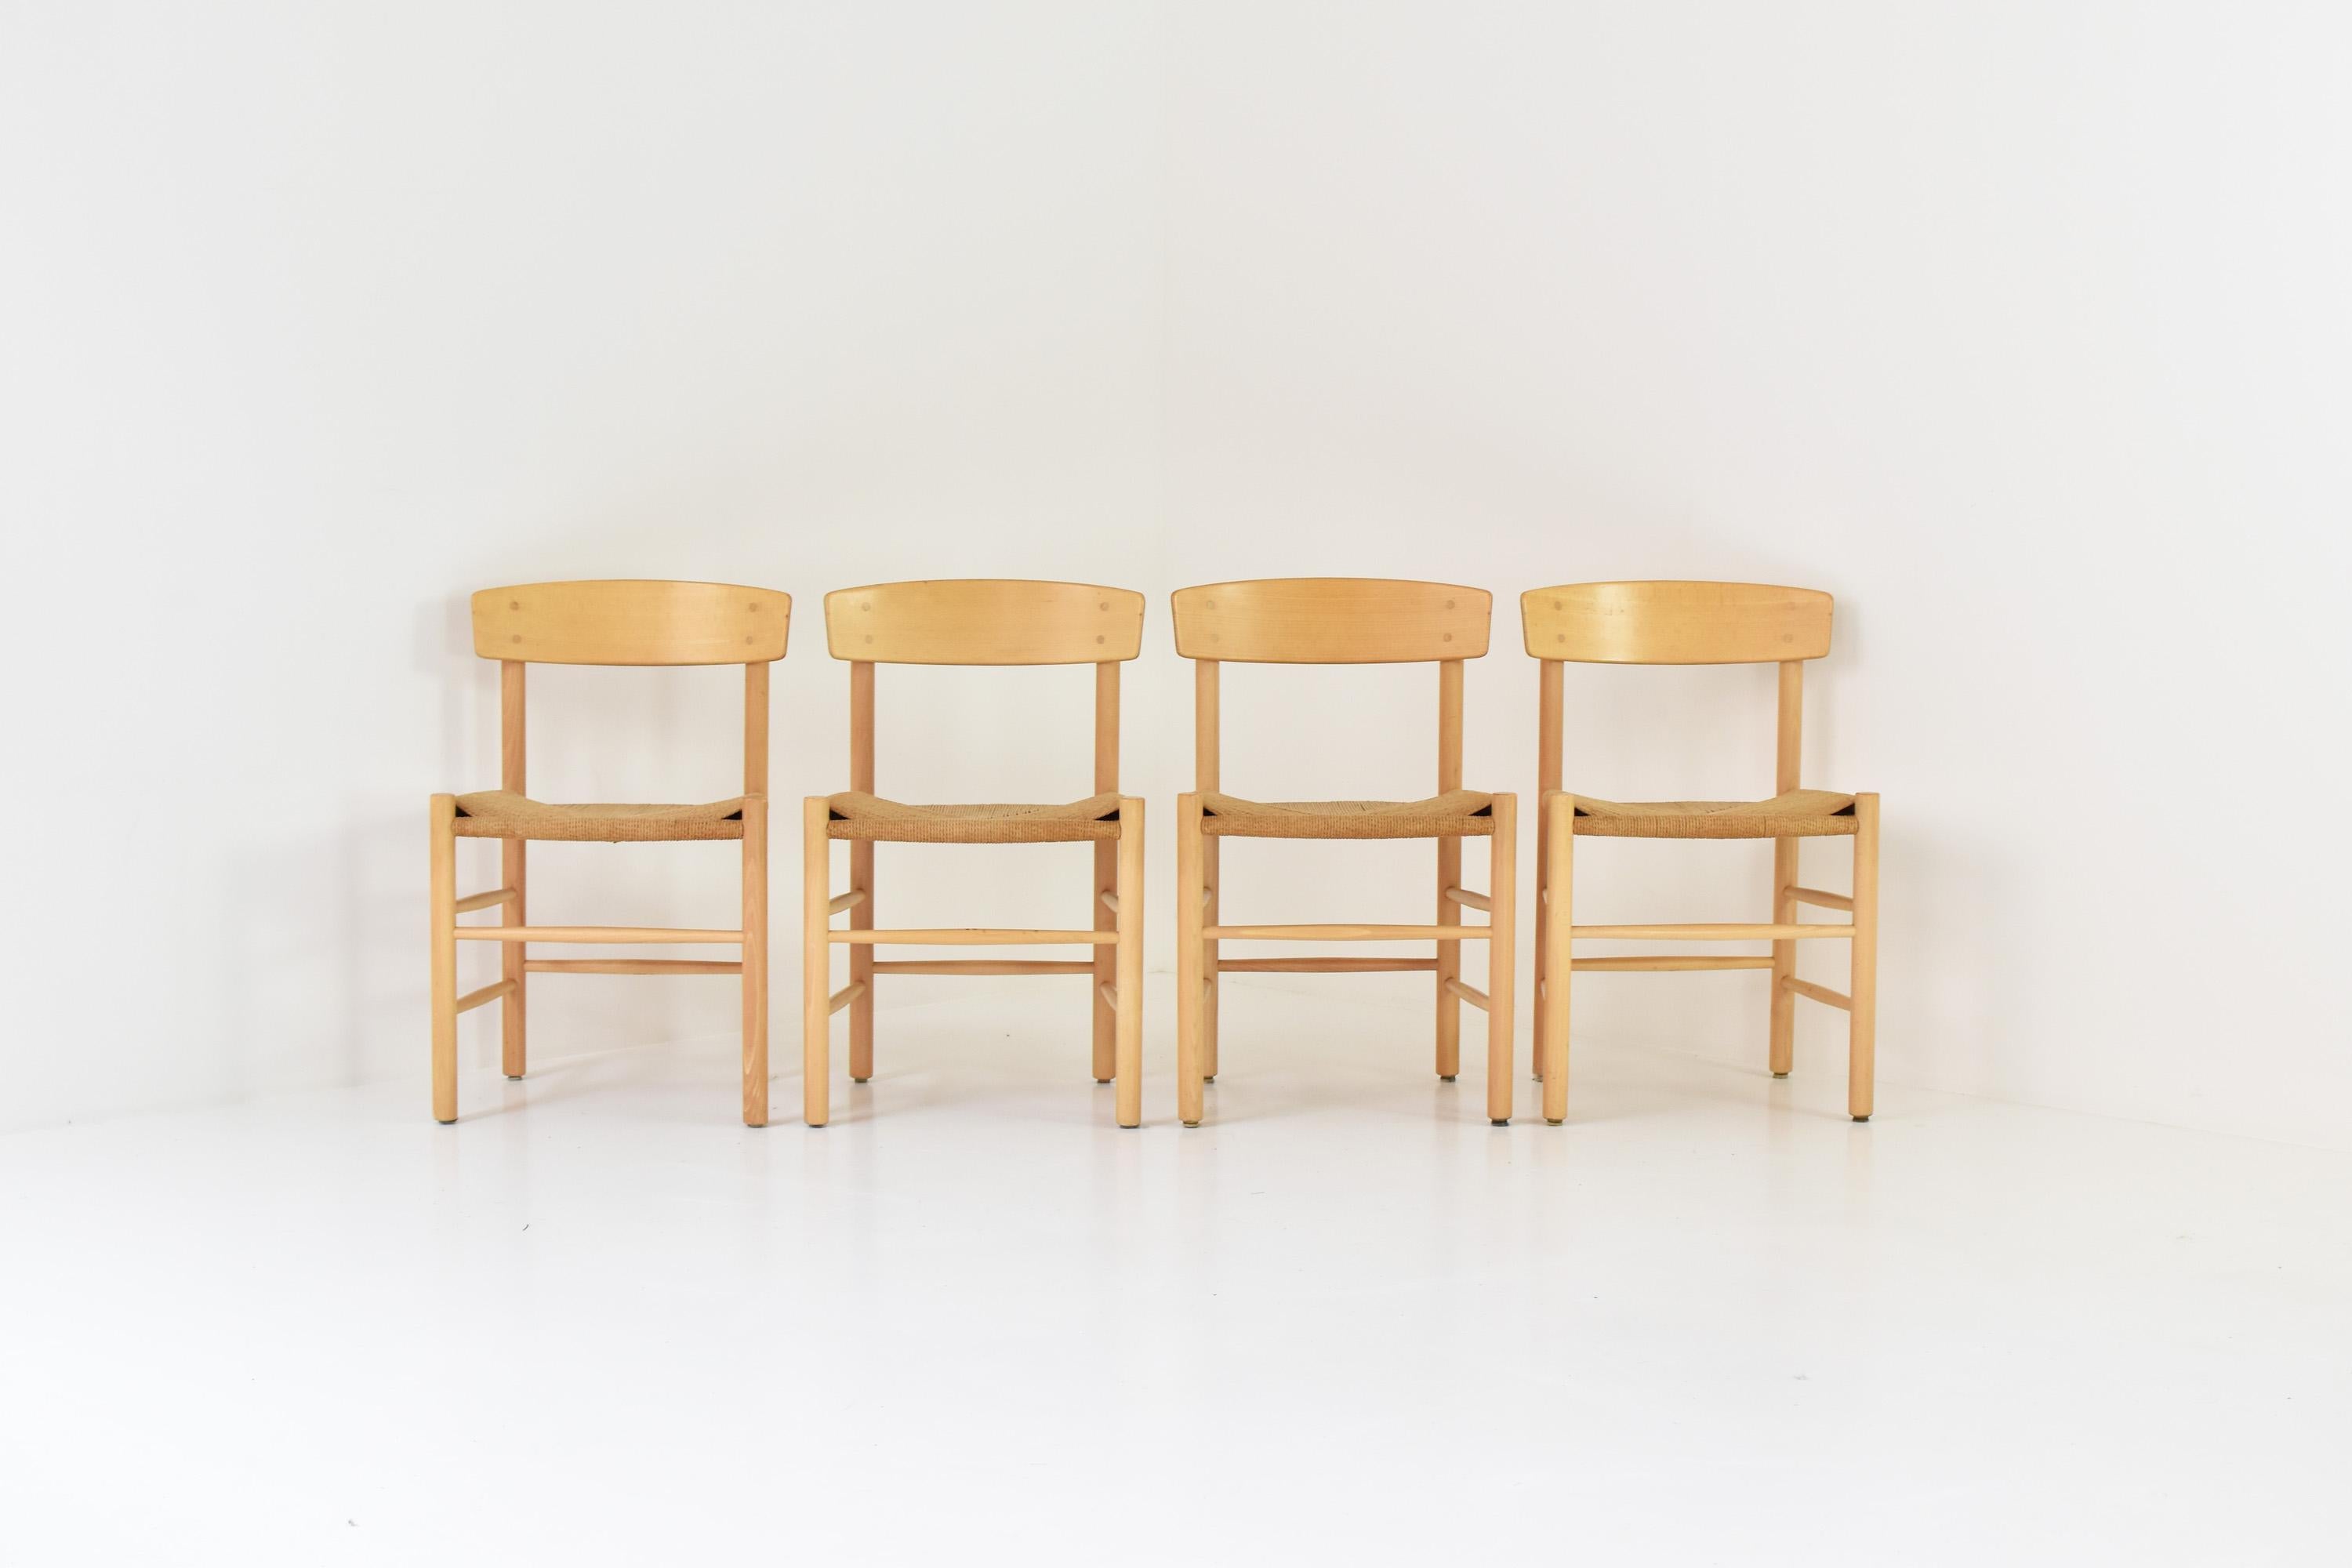 Set of 4 model ‘J39’ dining chairs by Børge Mogensen for FDB Møbler, Denmark 1960’s. These chairs are made out of oak and got its original handwoven paper cord seats. Due to its different use in private as well as public spaces the chair got called